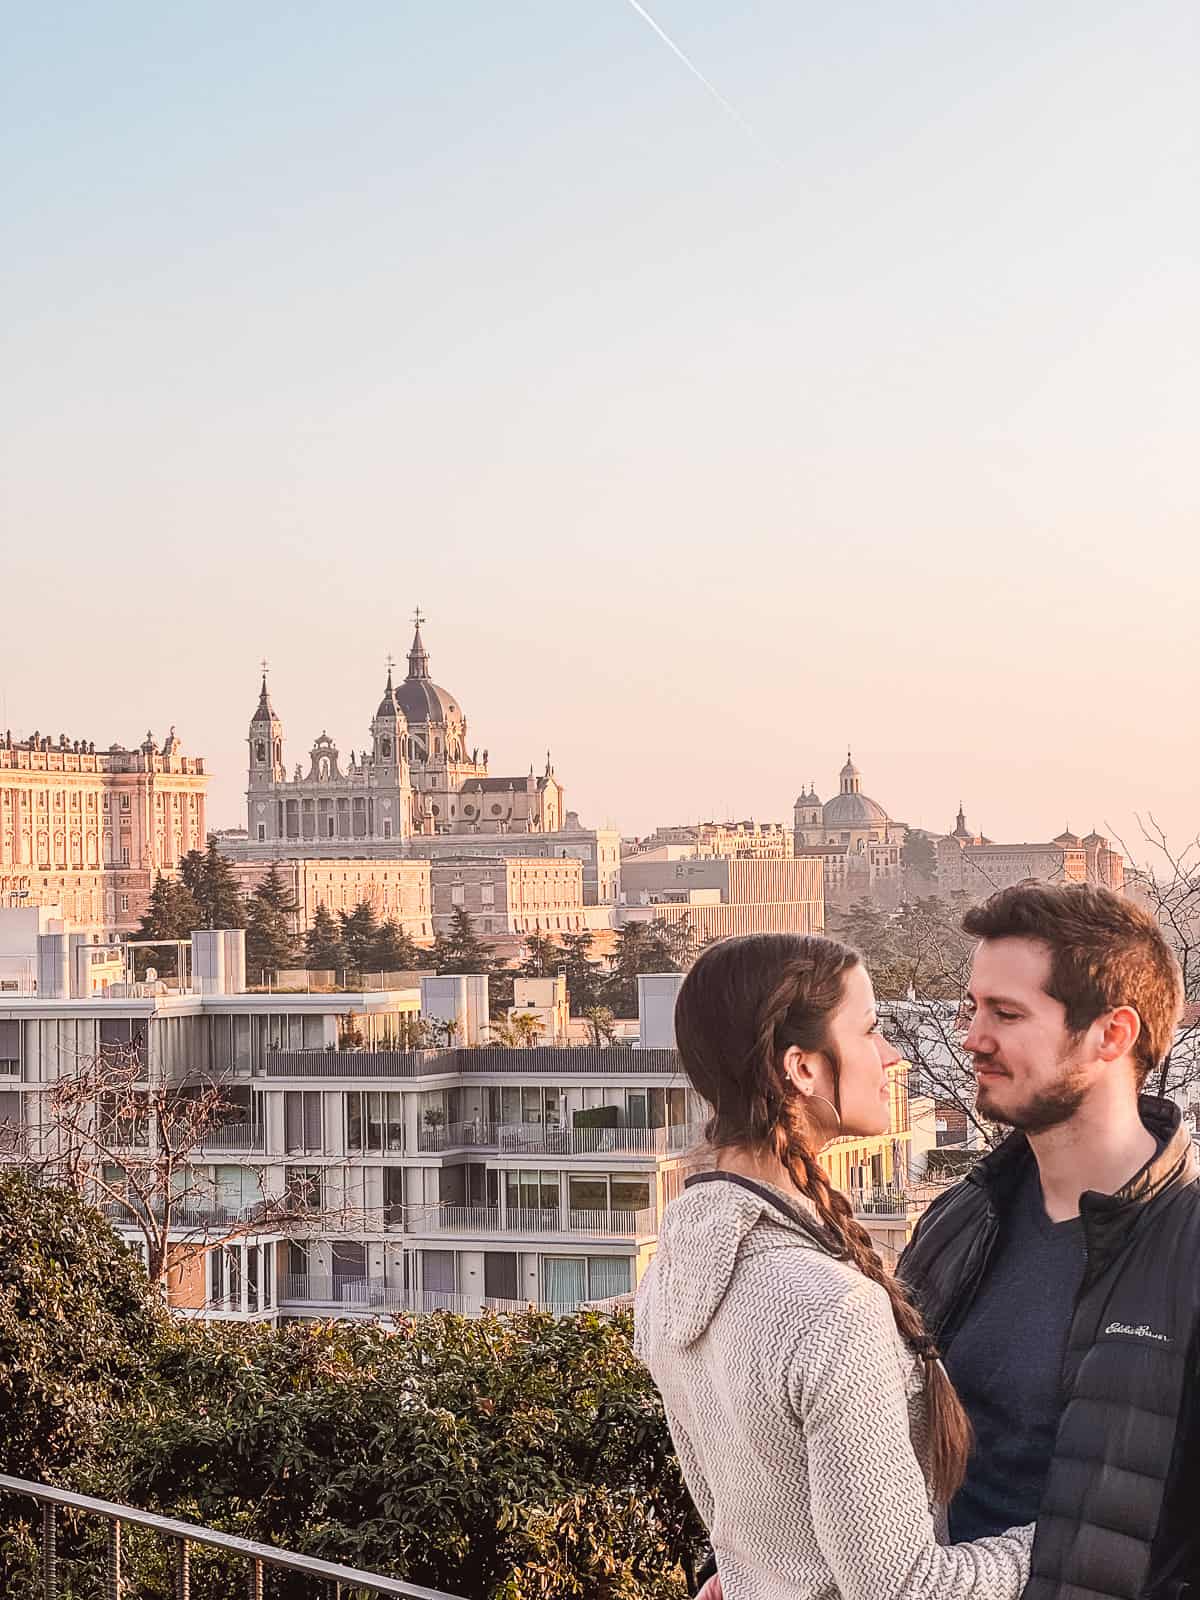 A couple gazing into each other's eyes in the foreground with the historical Templo de Debod and Madrid's cityscape bathed in the warm glow of sunset in the background.